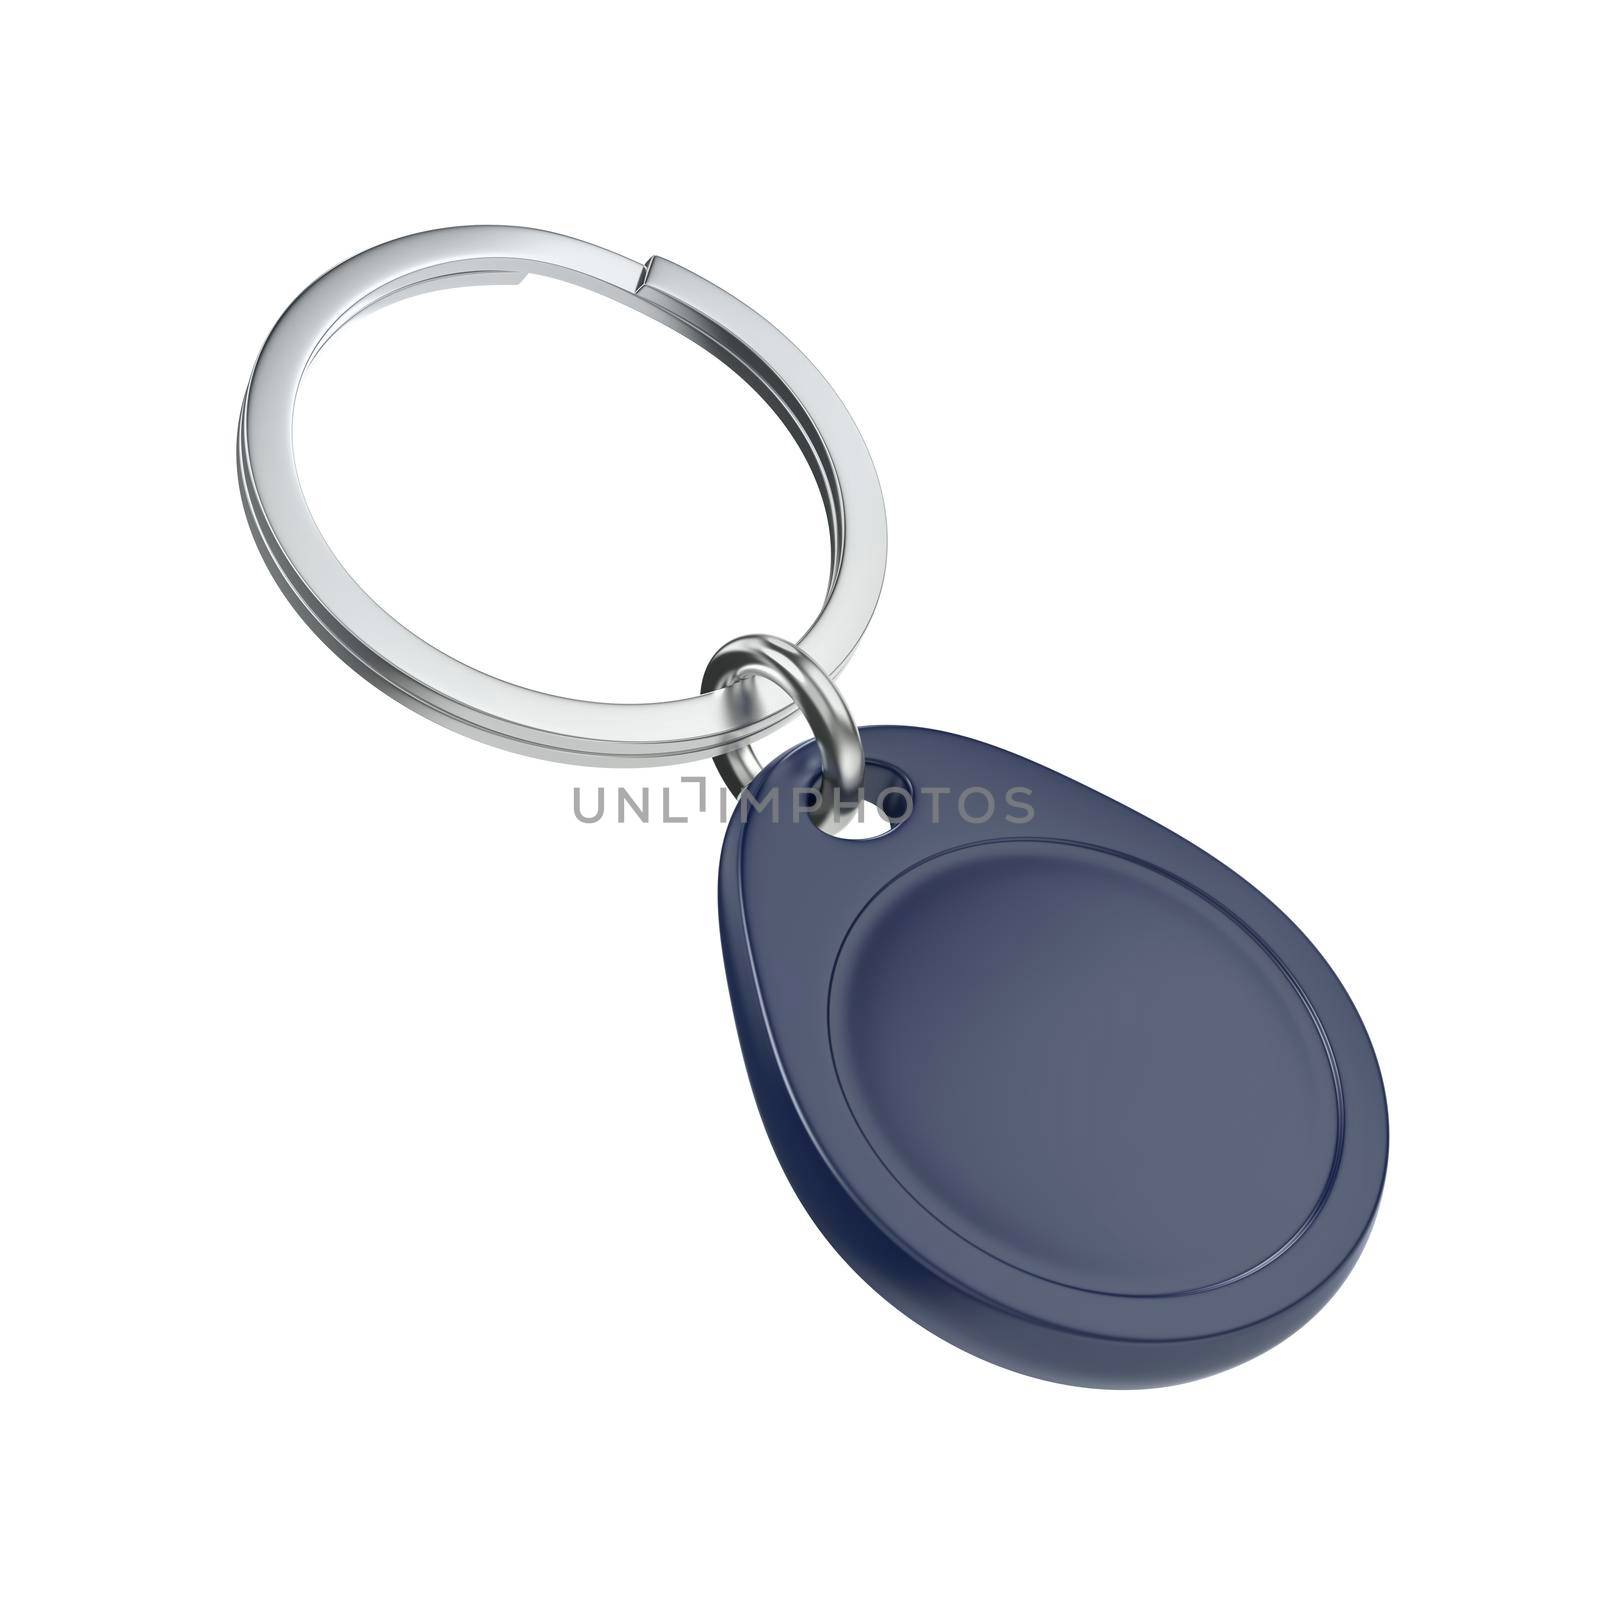 Blue RFID key fob
 by magraphics